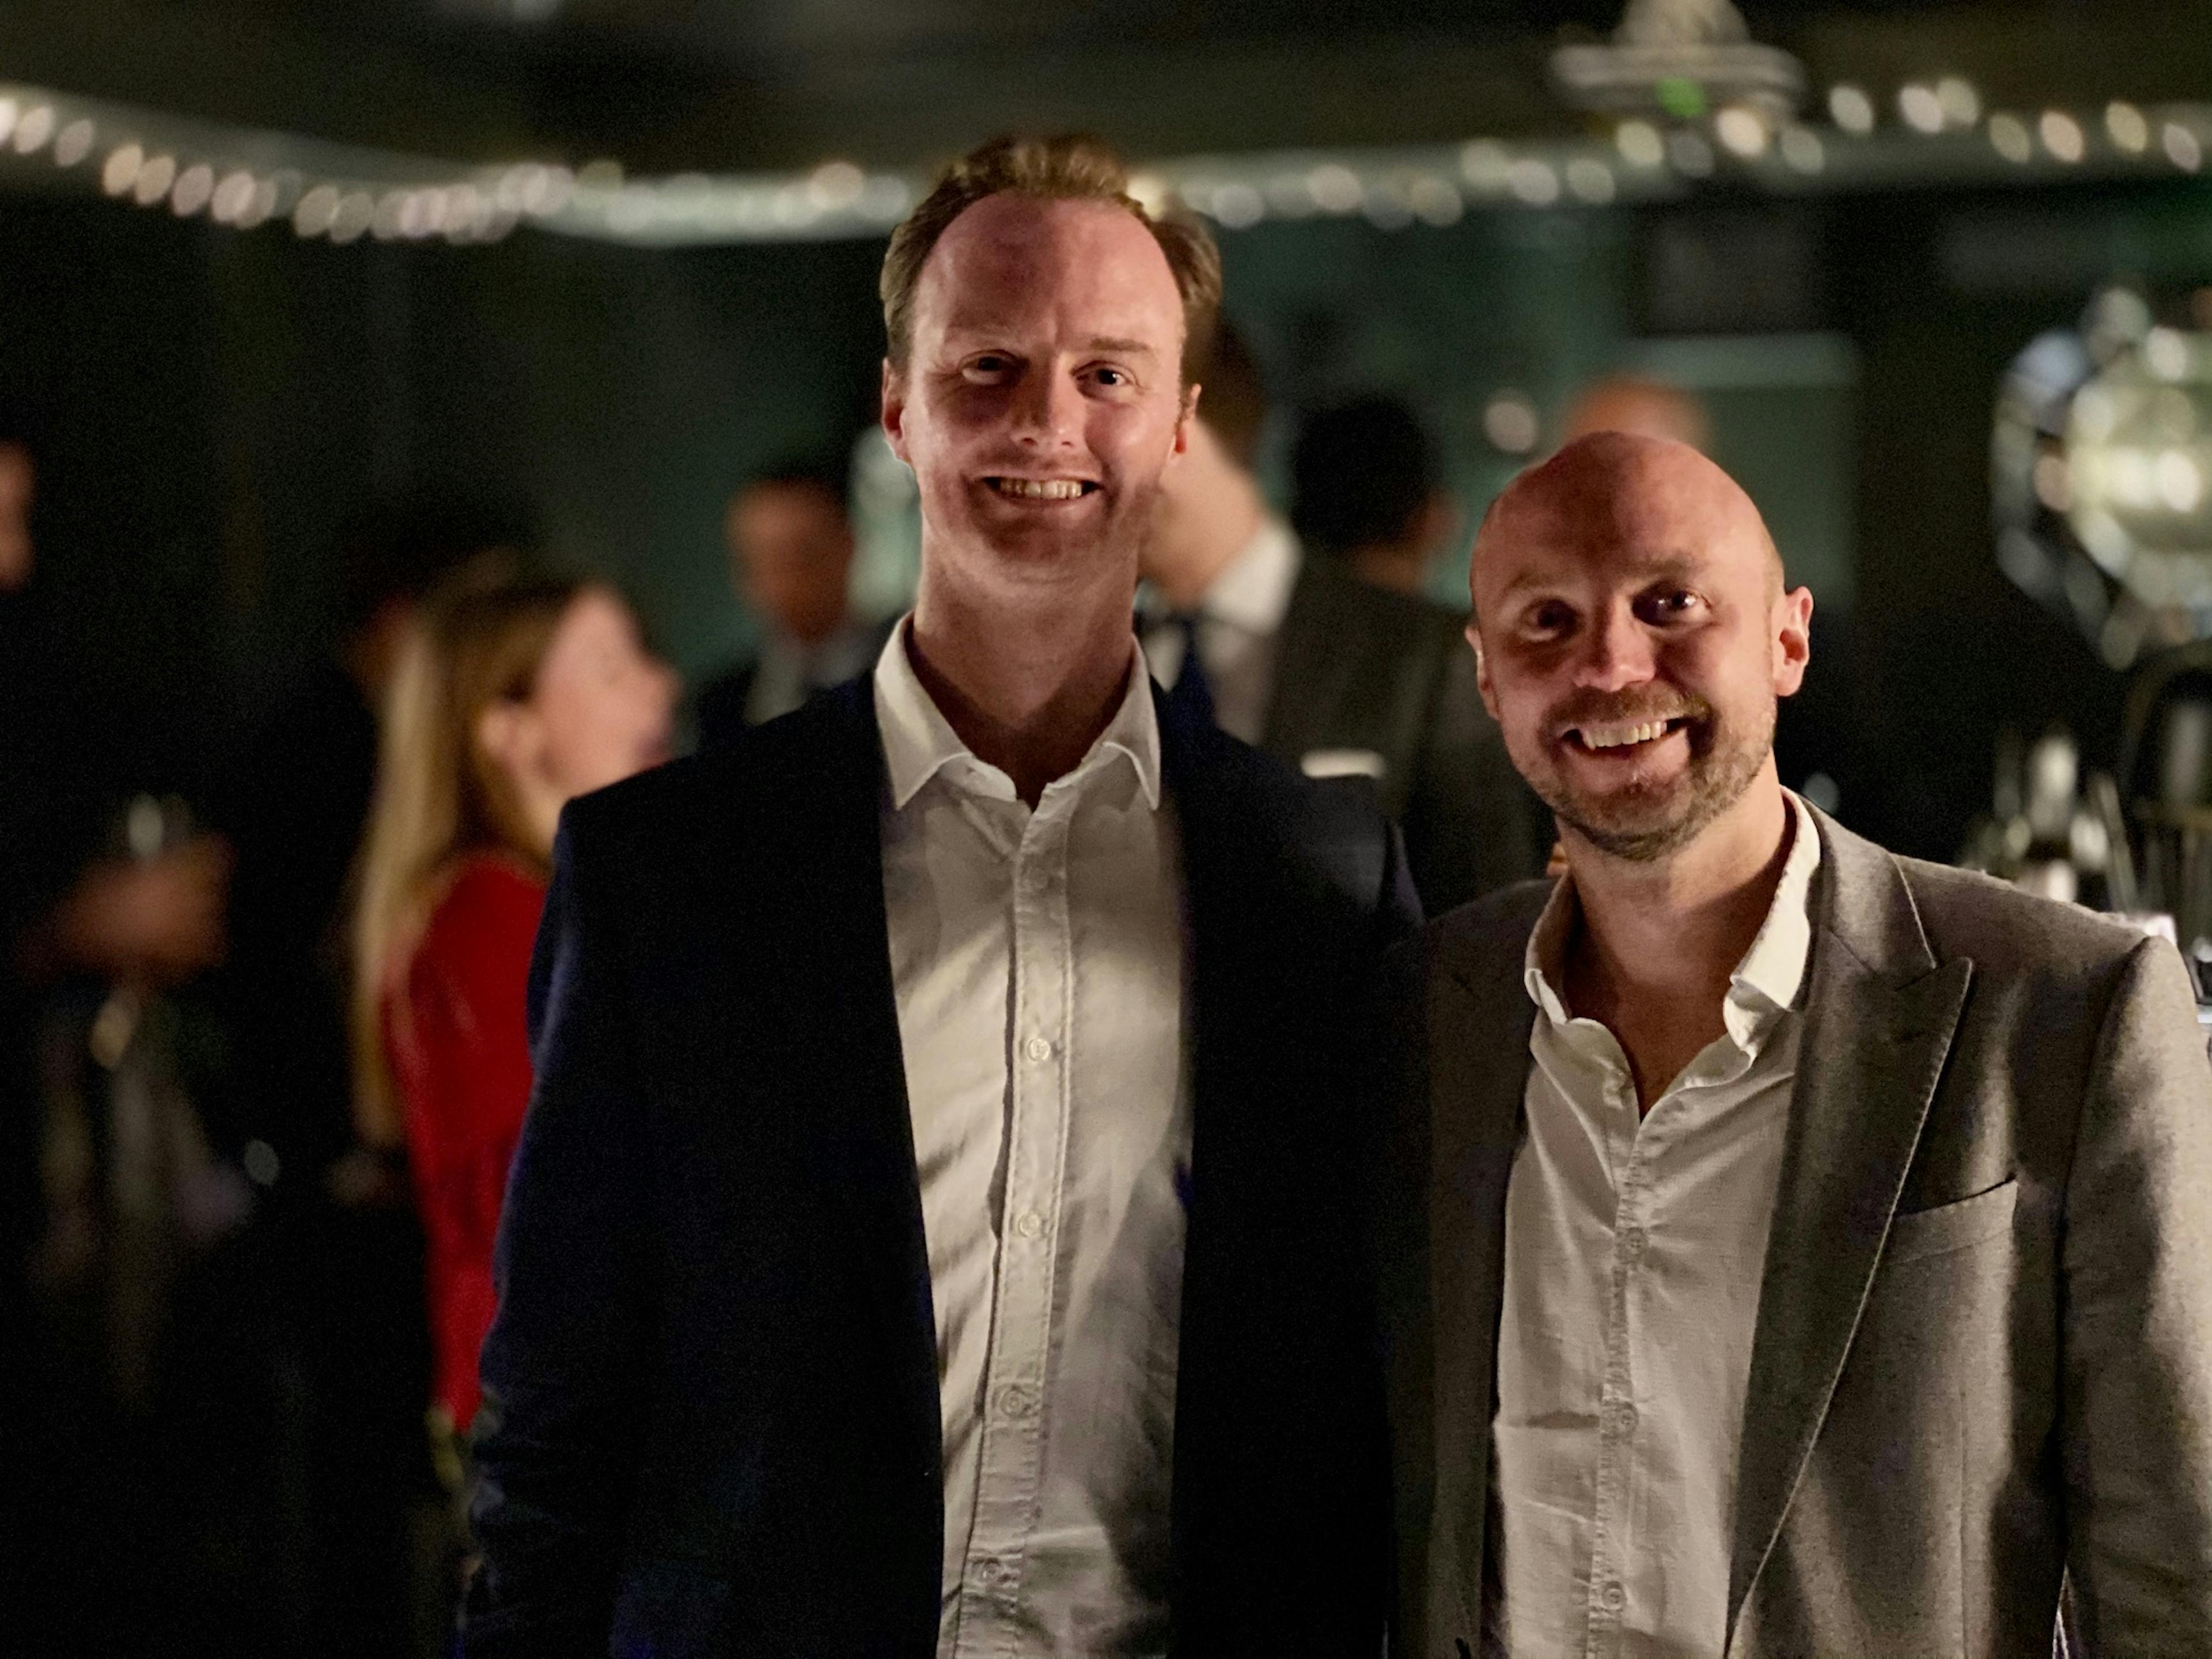 Ed Howkins (left) and Hamish Robertson at the First trial event for  The Watch Collectors' Club in November 2019